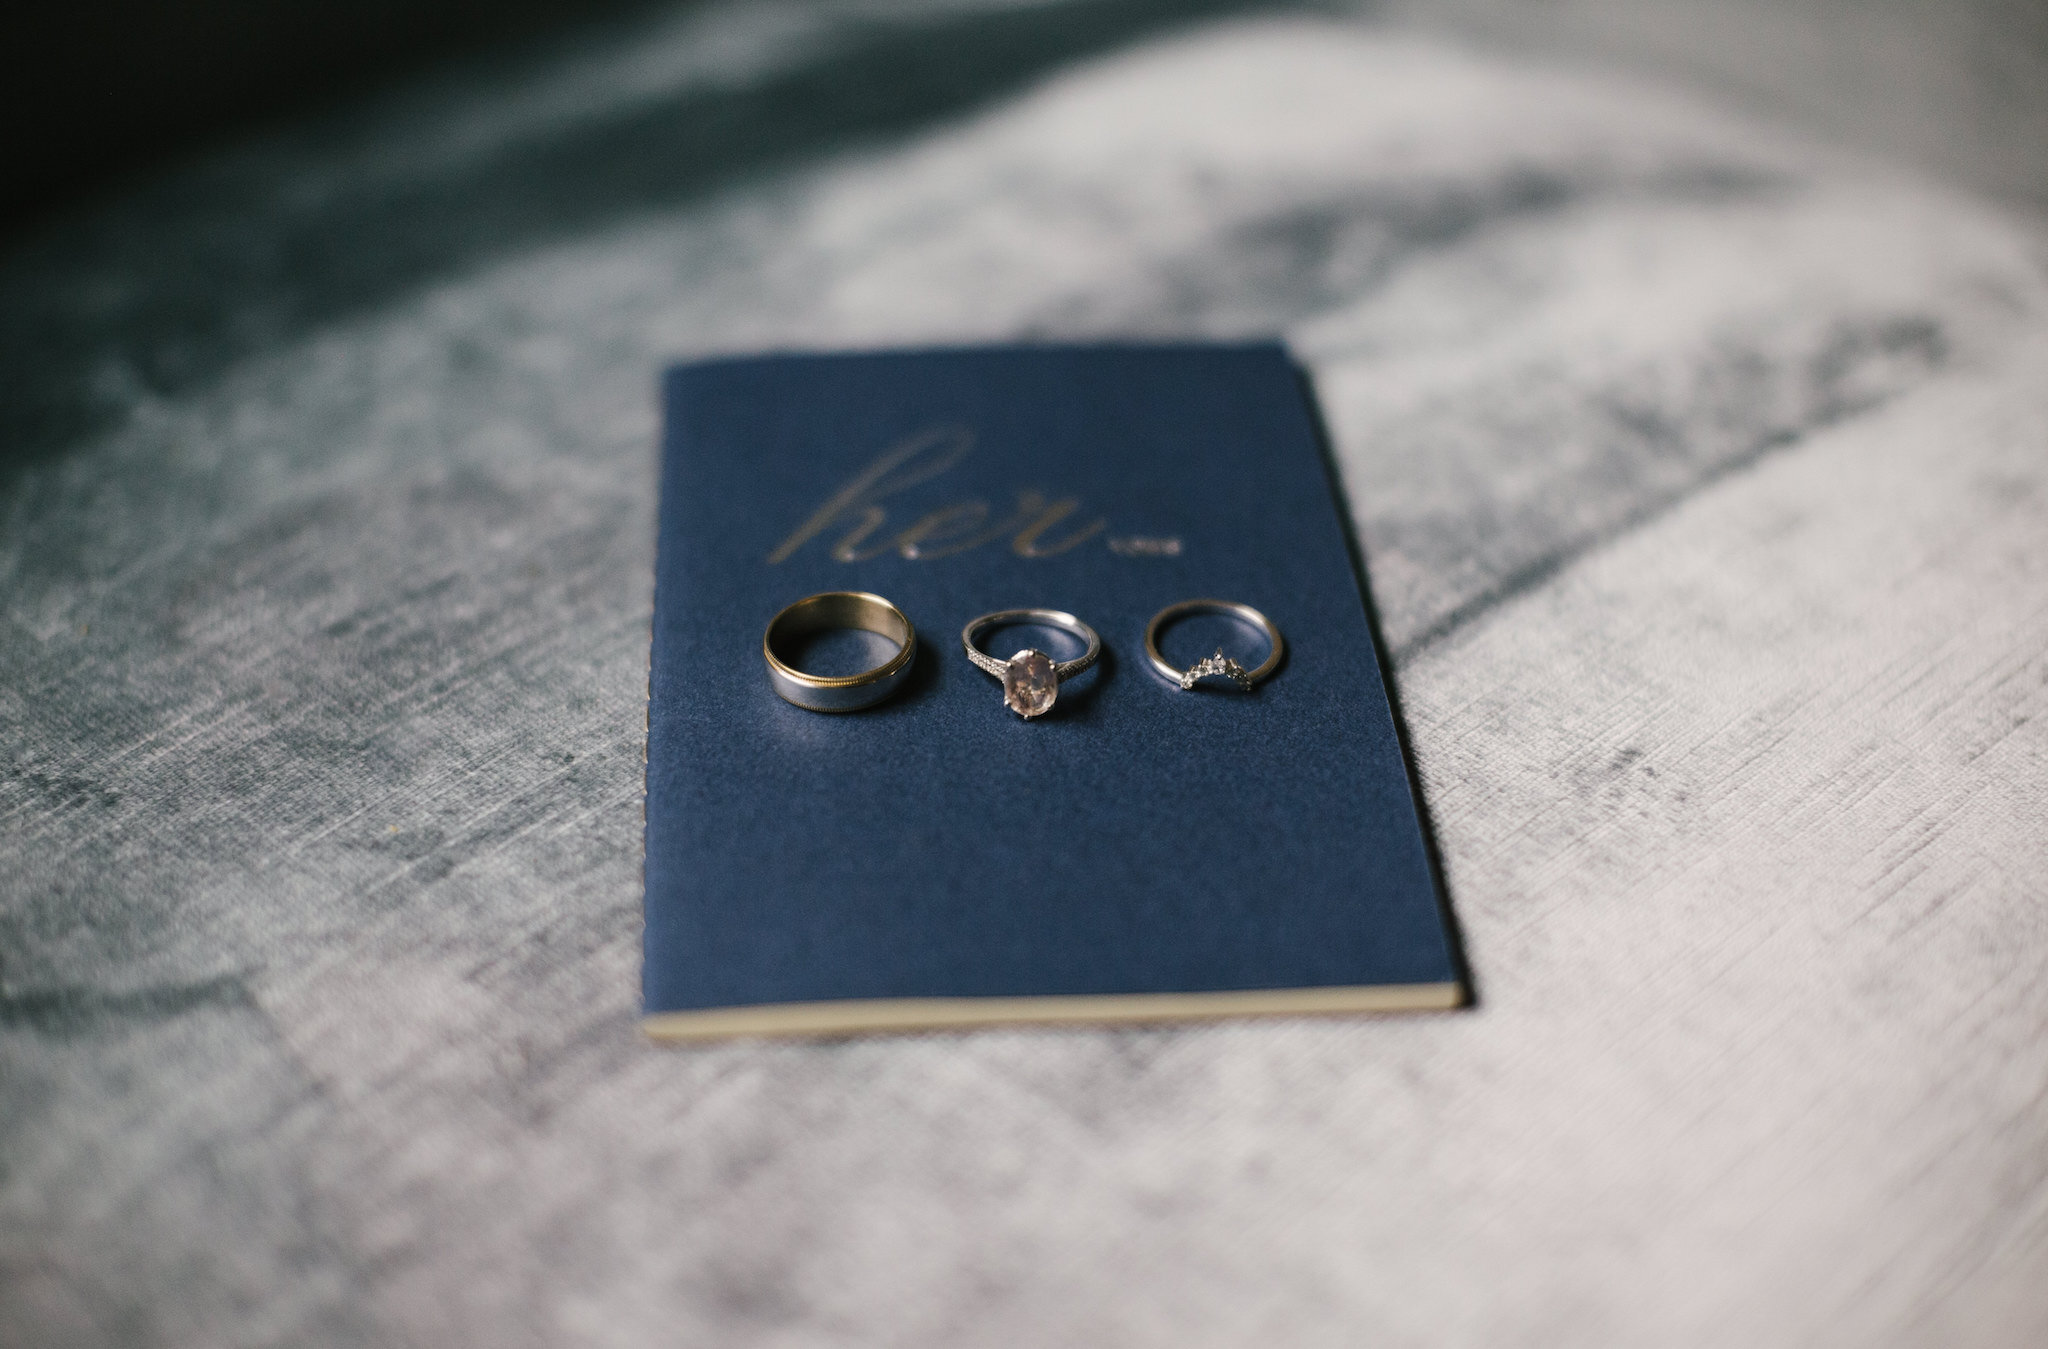 Wedding Rings: Elegant Jewel-Toned Wedding captured by Dorey Kronick featured on CHI thee WED